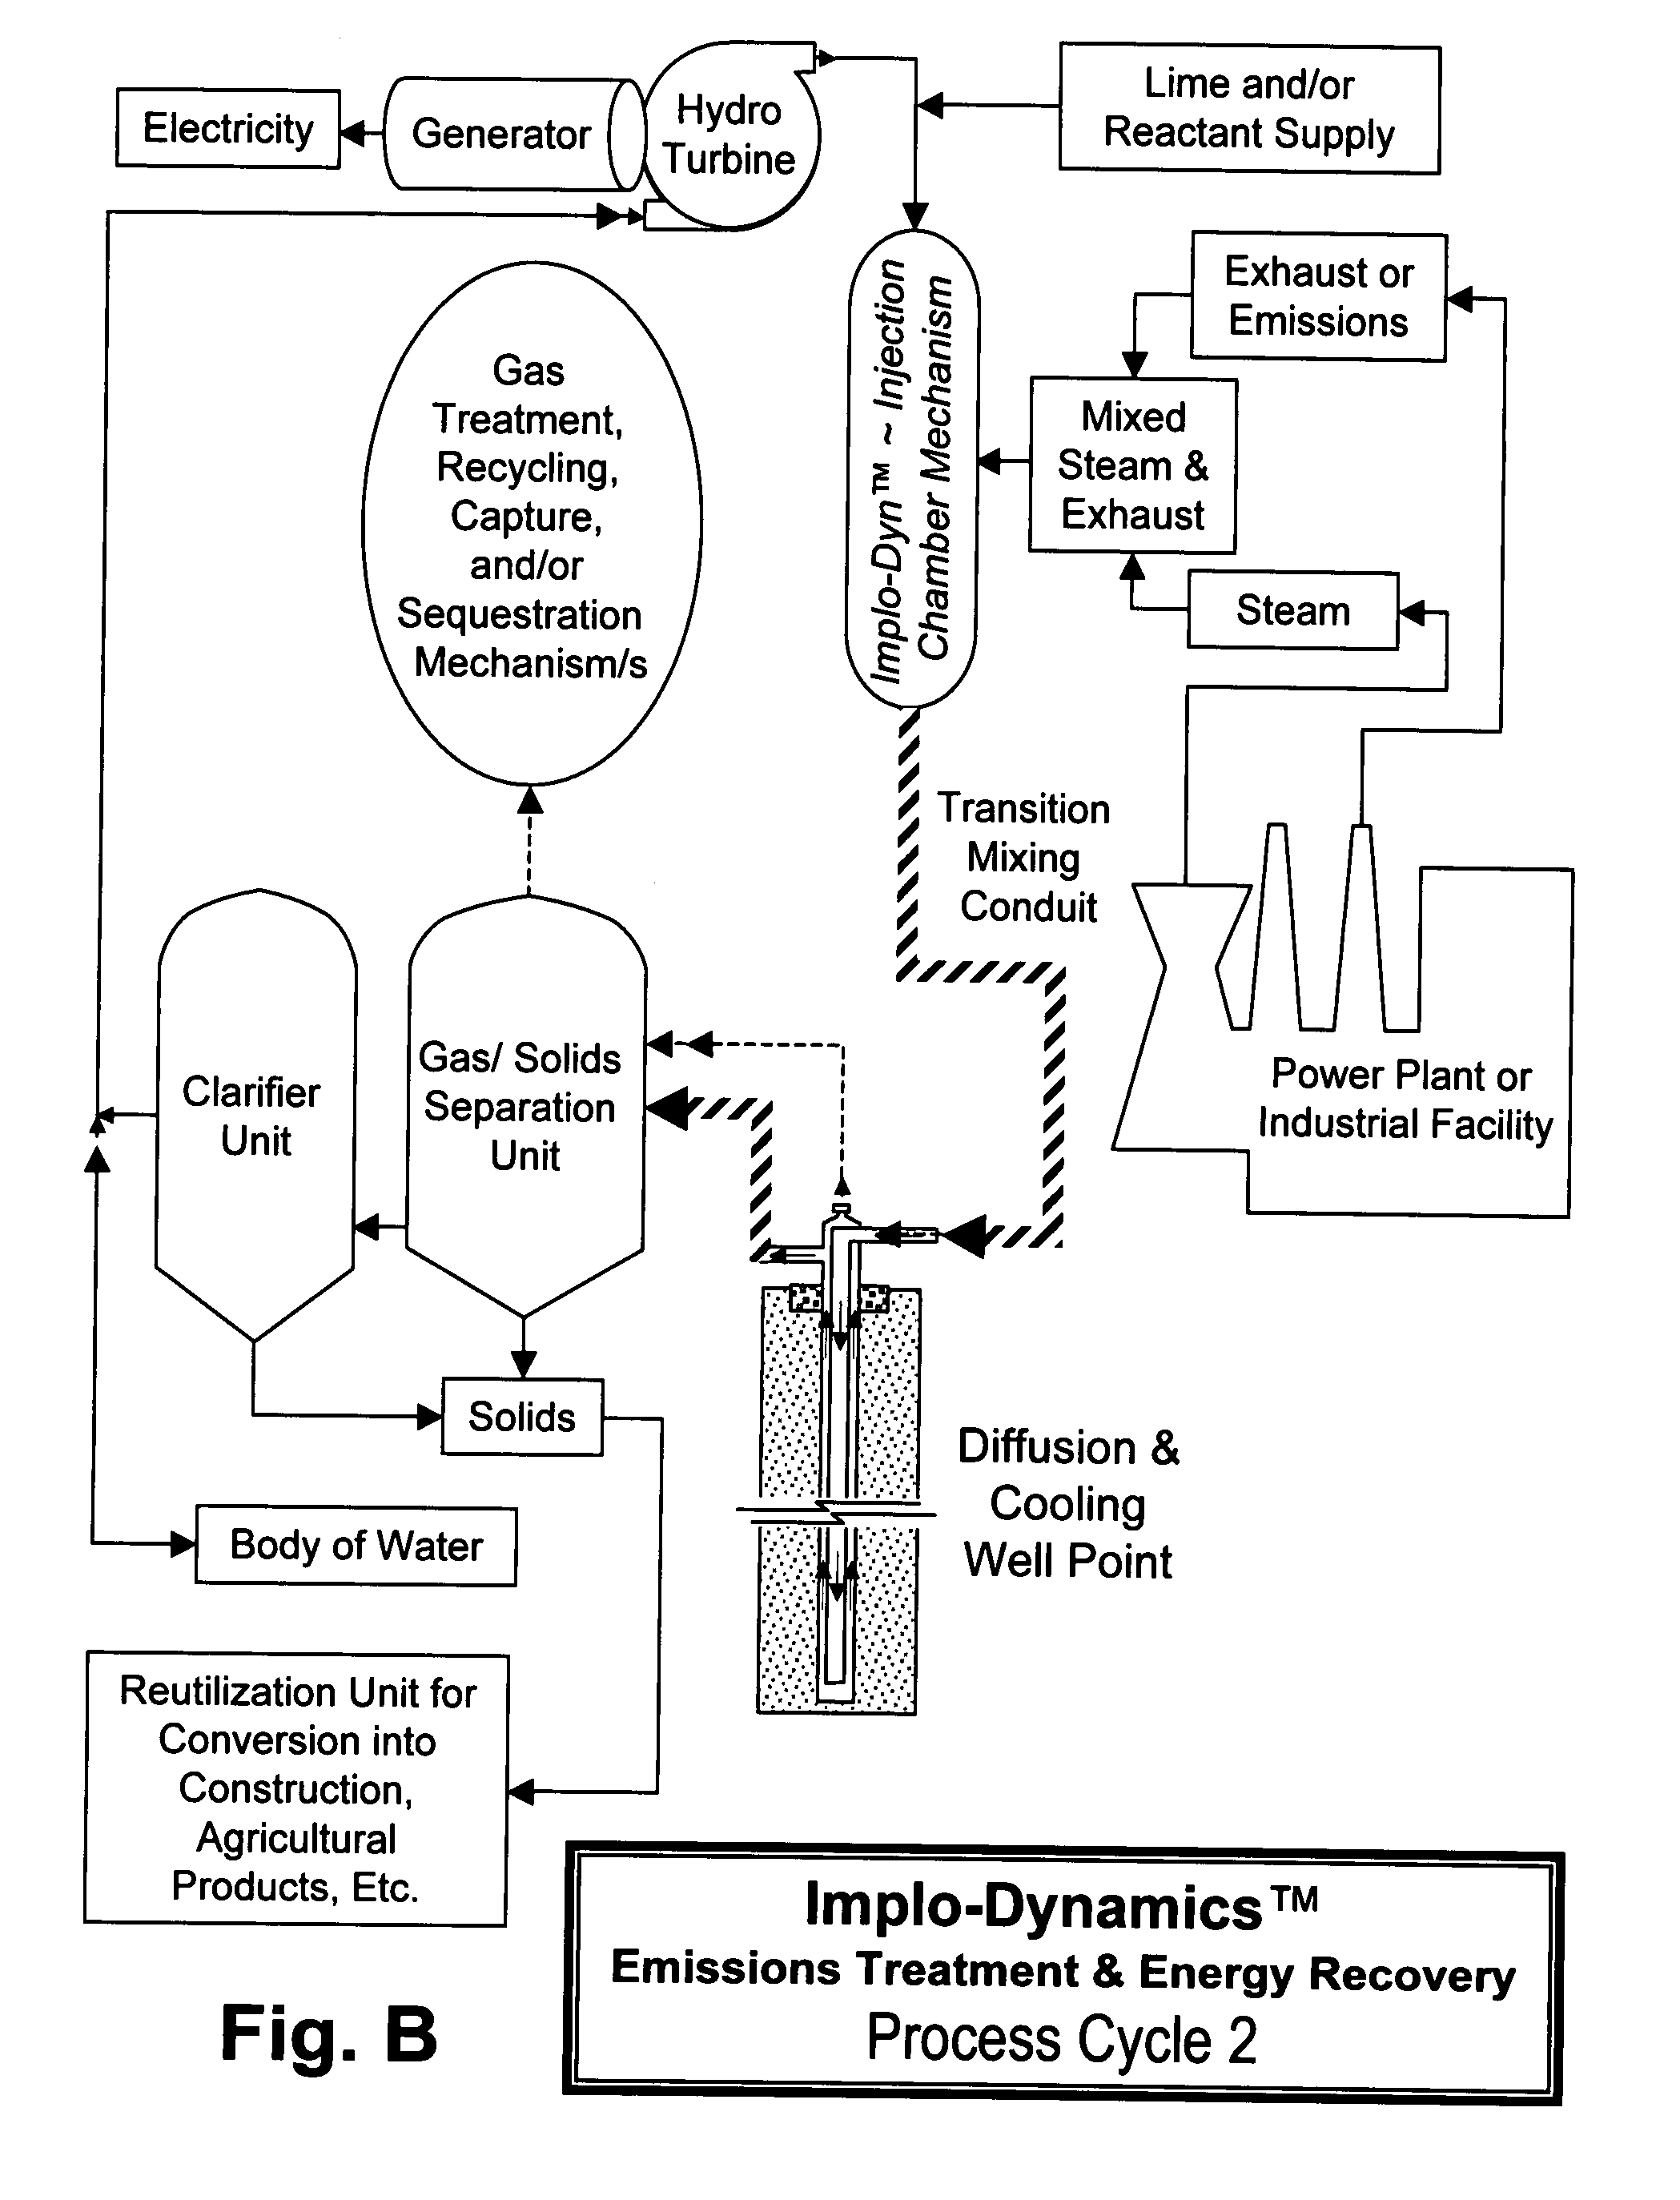 Implo-Dynamics(TM): a system, method, and apparatus for reducing airborne pollutant emissions and/or recovering energy